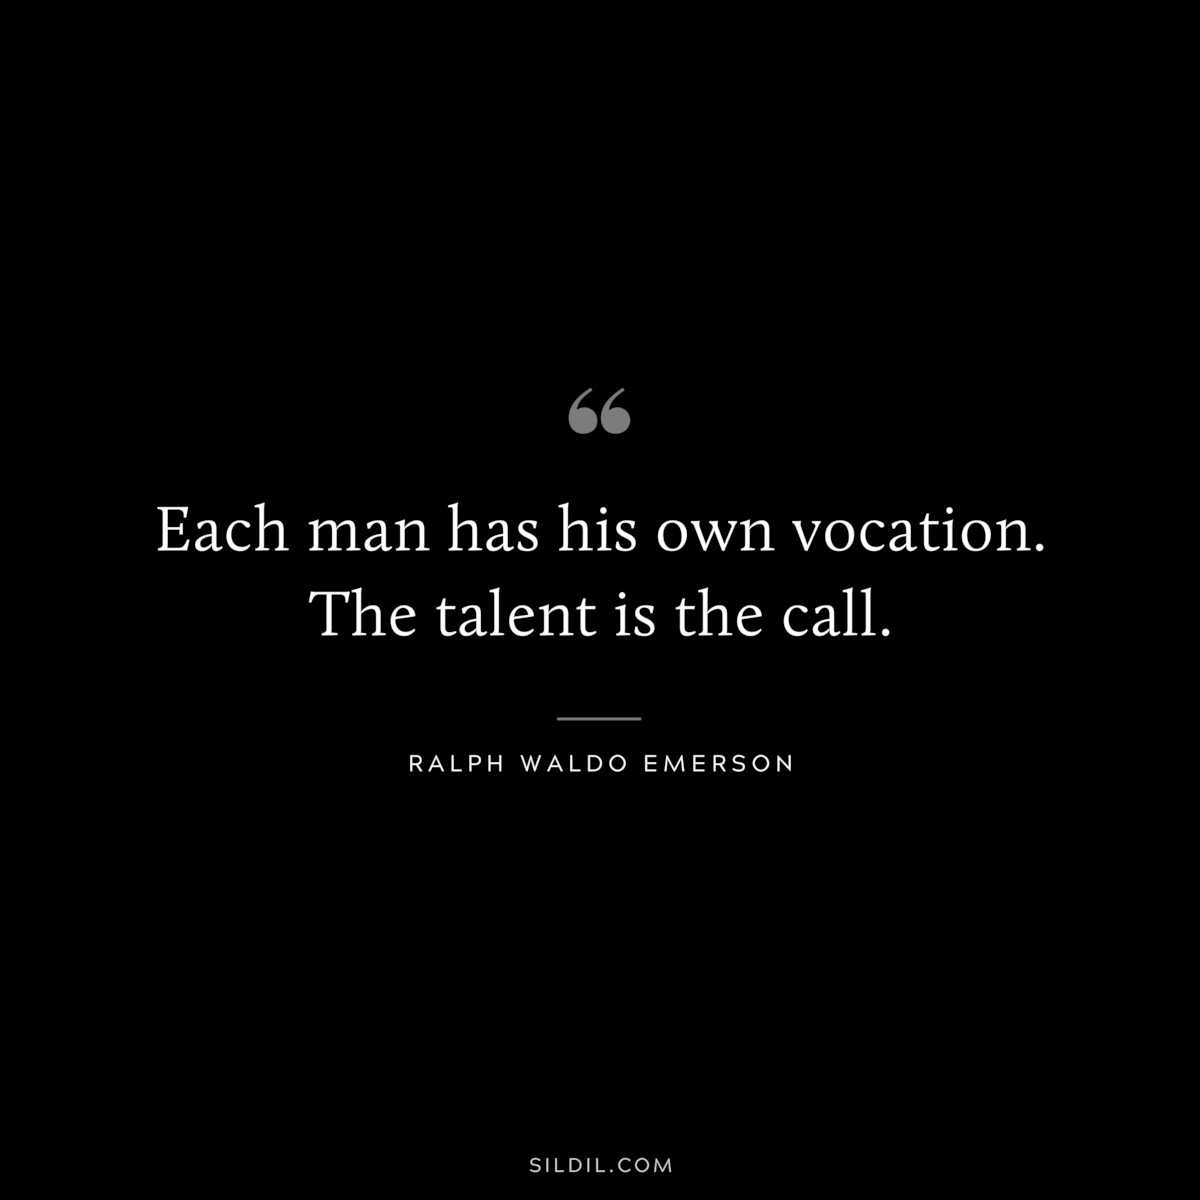 Each man has his own vocation. The talent is the call. — Ralph Waldo Emerson